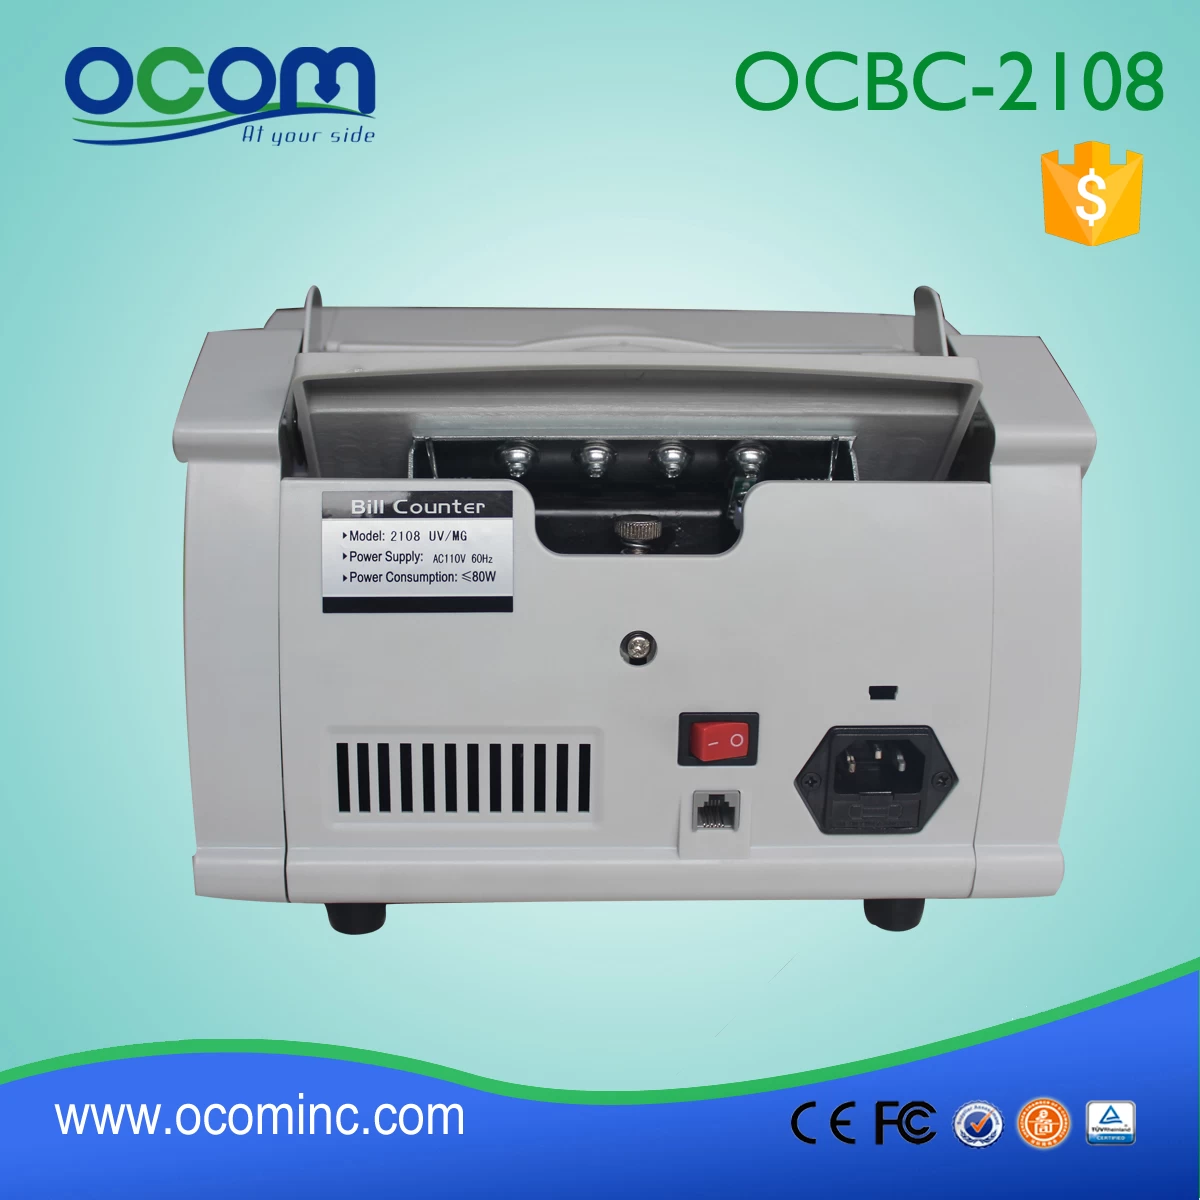 OCBC-2108:Banknote Bill Currency Counter with Fake Detector